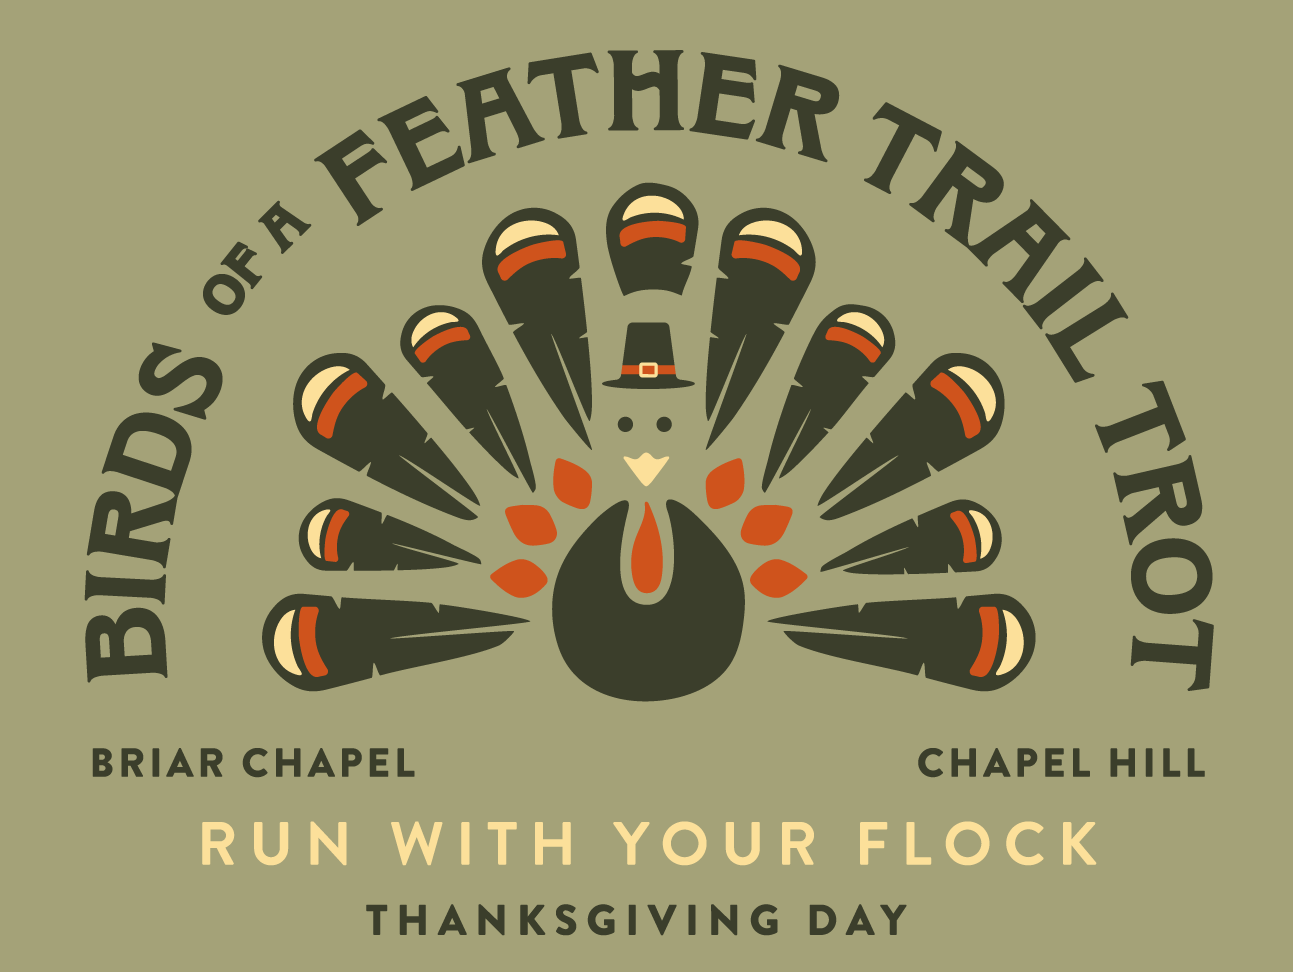 Birds of a Feather Trail Trot logo on RaceRaves